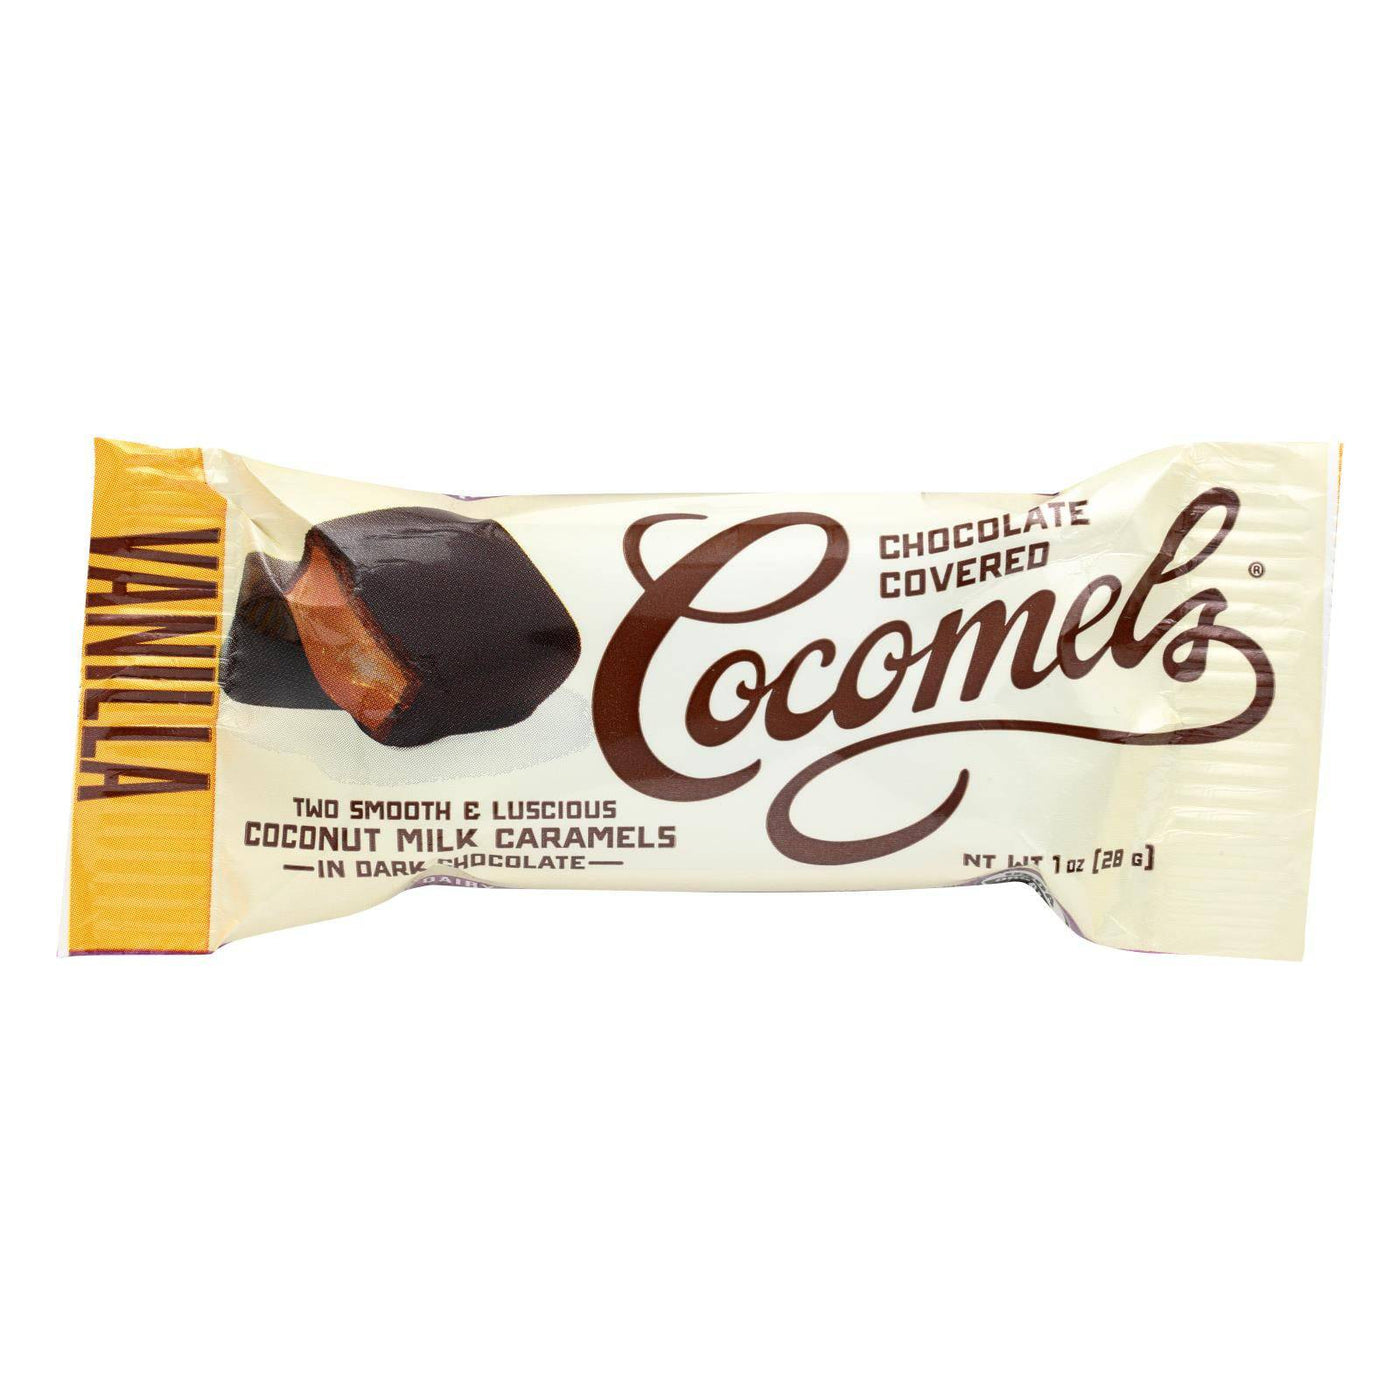 Cocomel - Dark Chocolate Covered Cocomel -s - Vanilla - Case Of 15 - 1 Oz. | OnlyNaturals.us